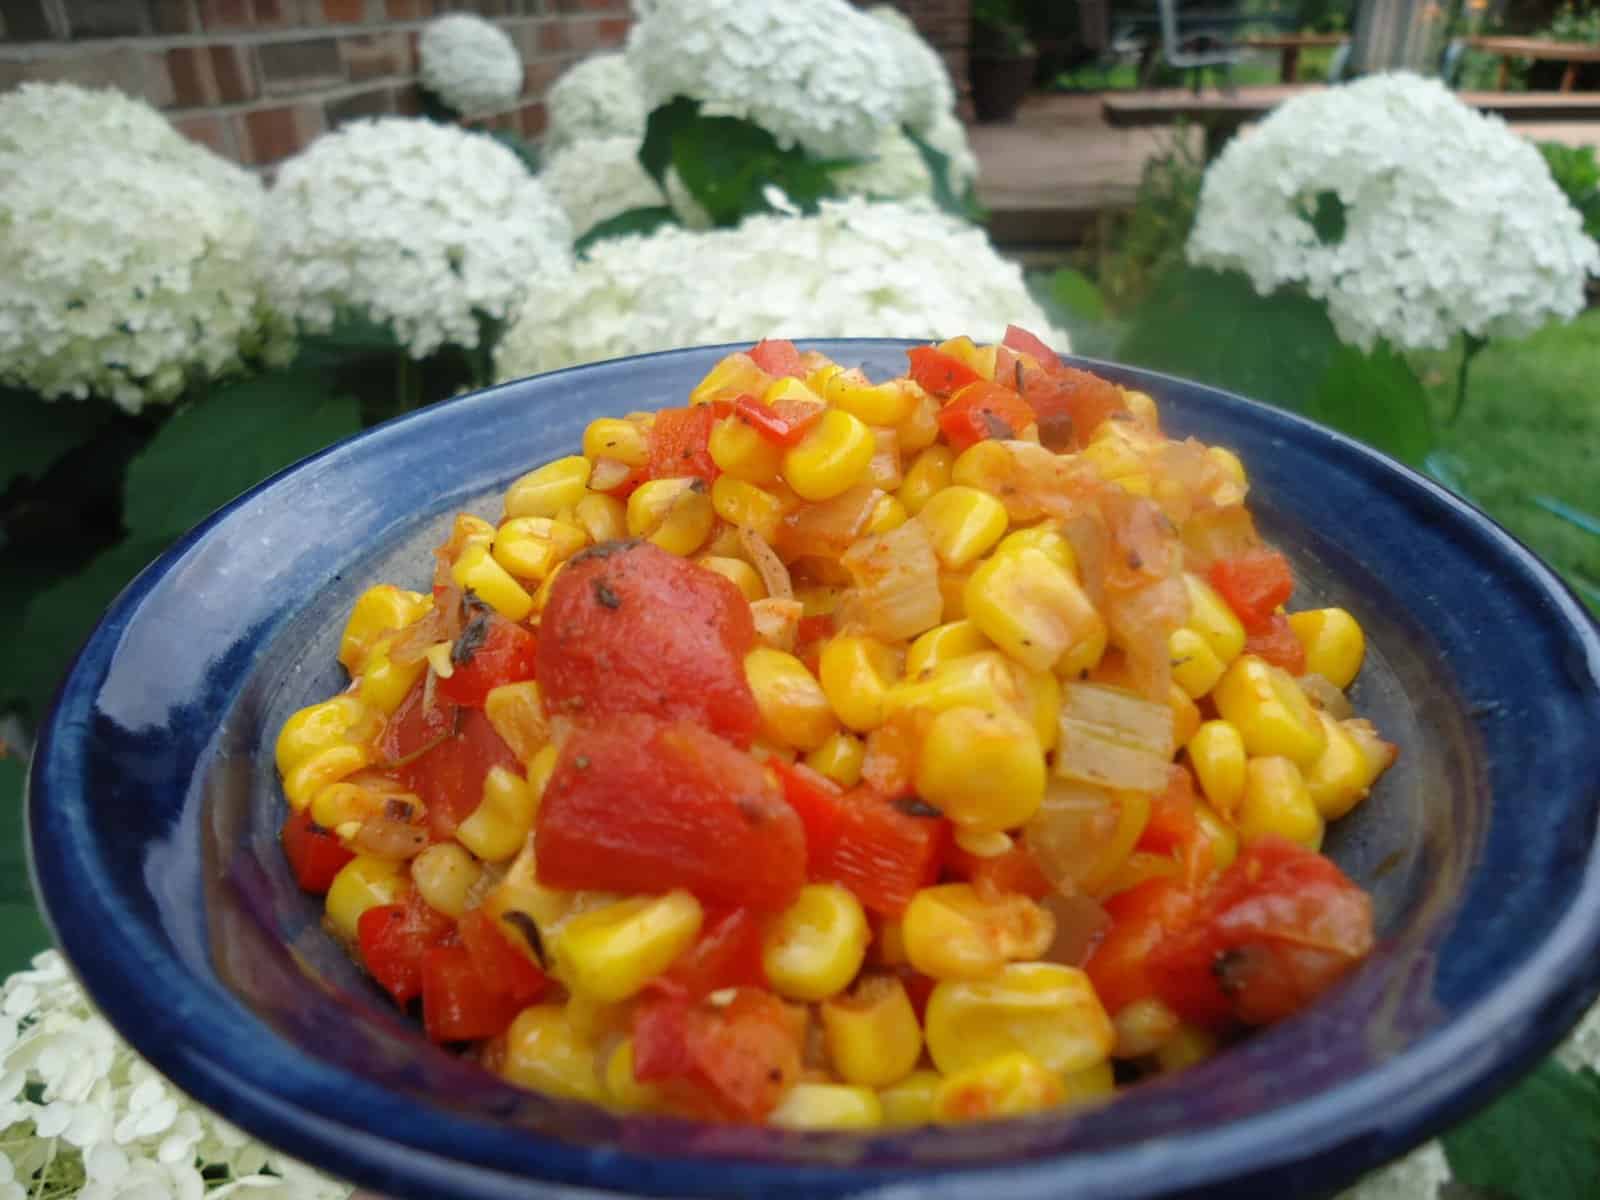  Get ready to add some spice to your corn with this delicious Cajun smothered corn recipe!